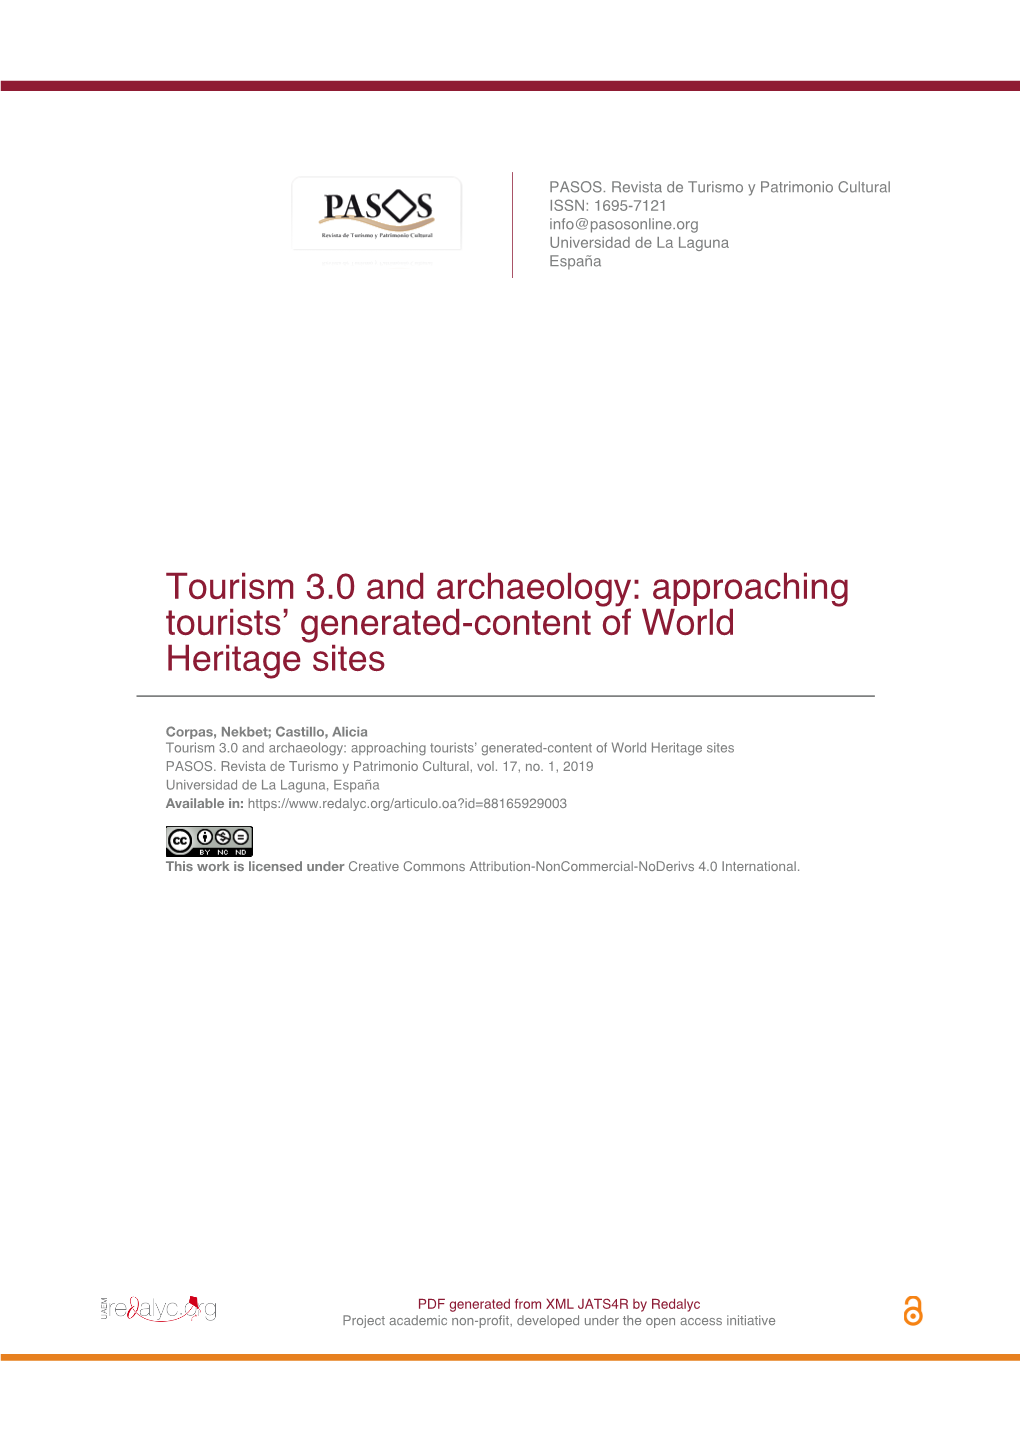 Tourism 3.0 and Archaeology: Approaching Tourists’ Generated-Content of World Heritage Sites